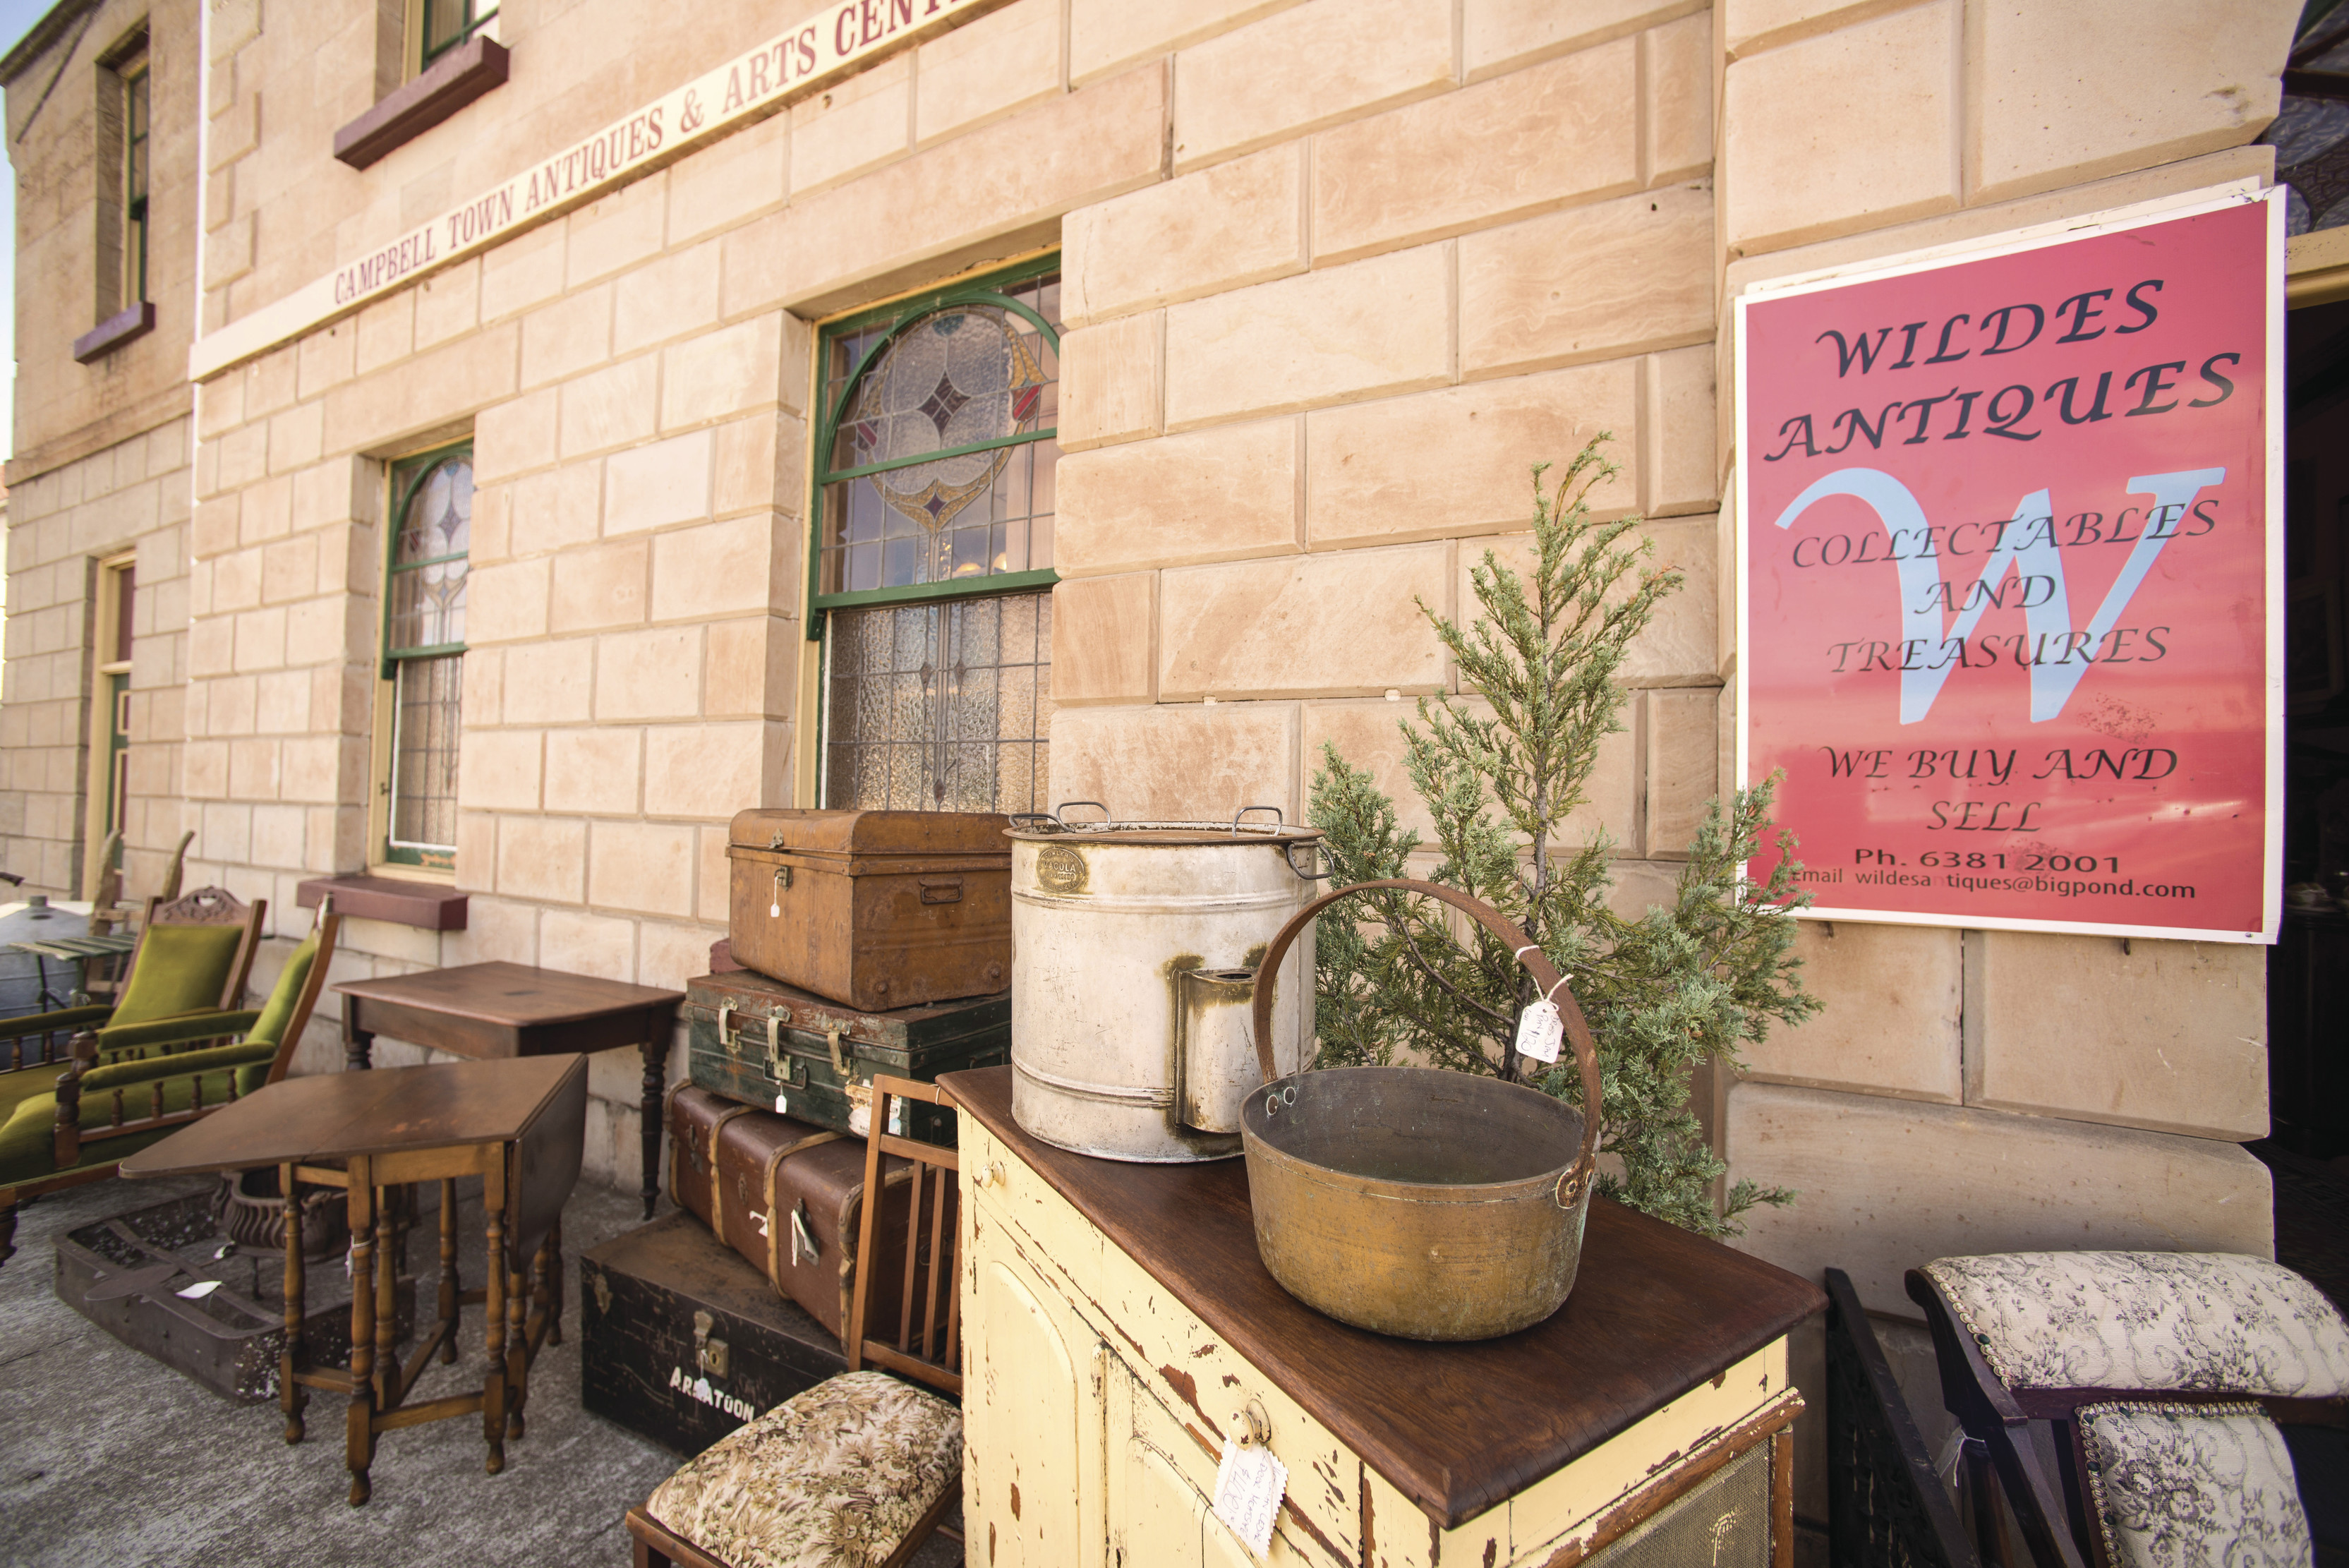 Items for sale outside Wildes Antiques, Campbell Town